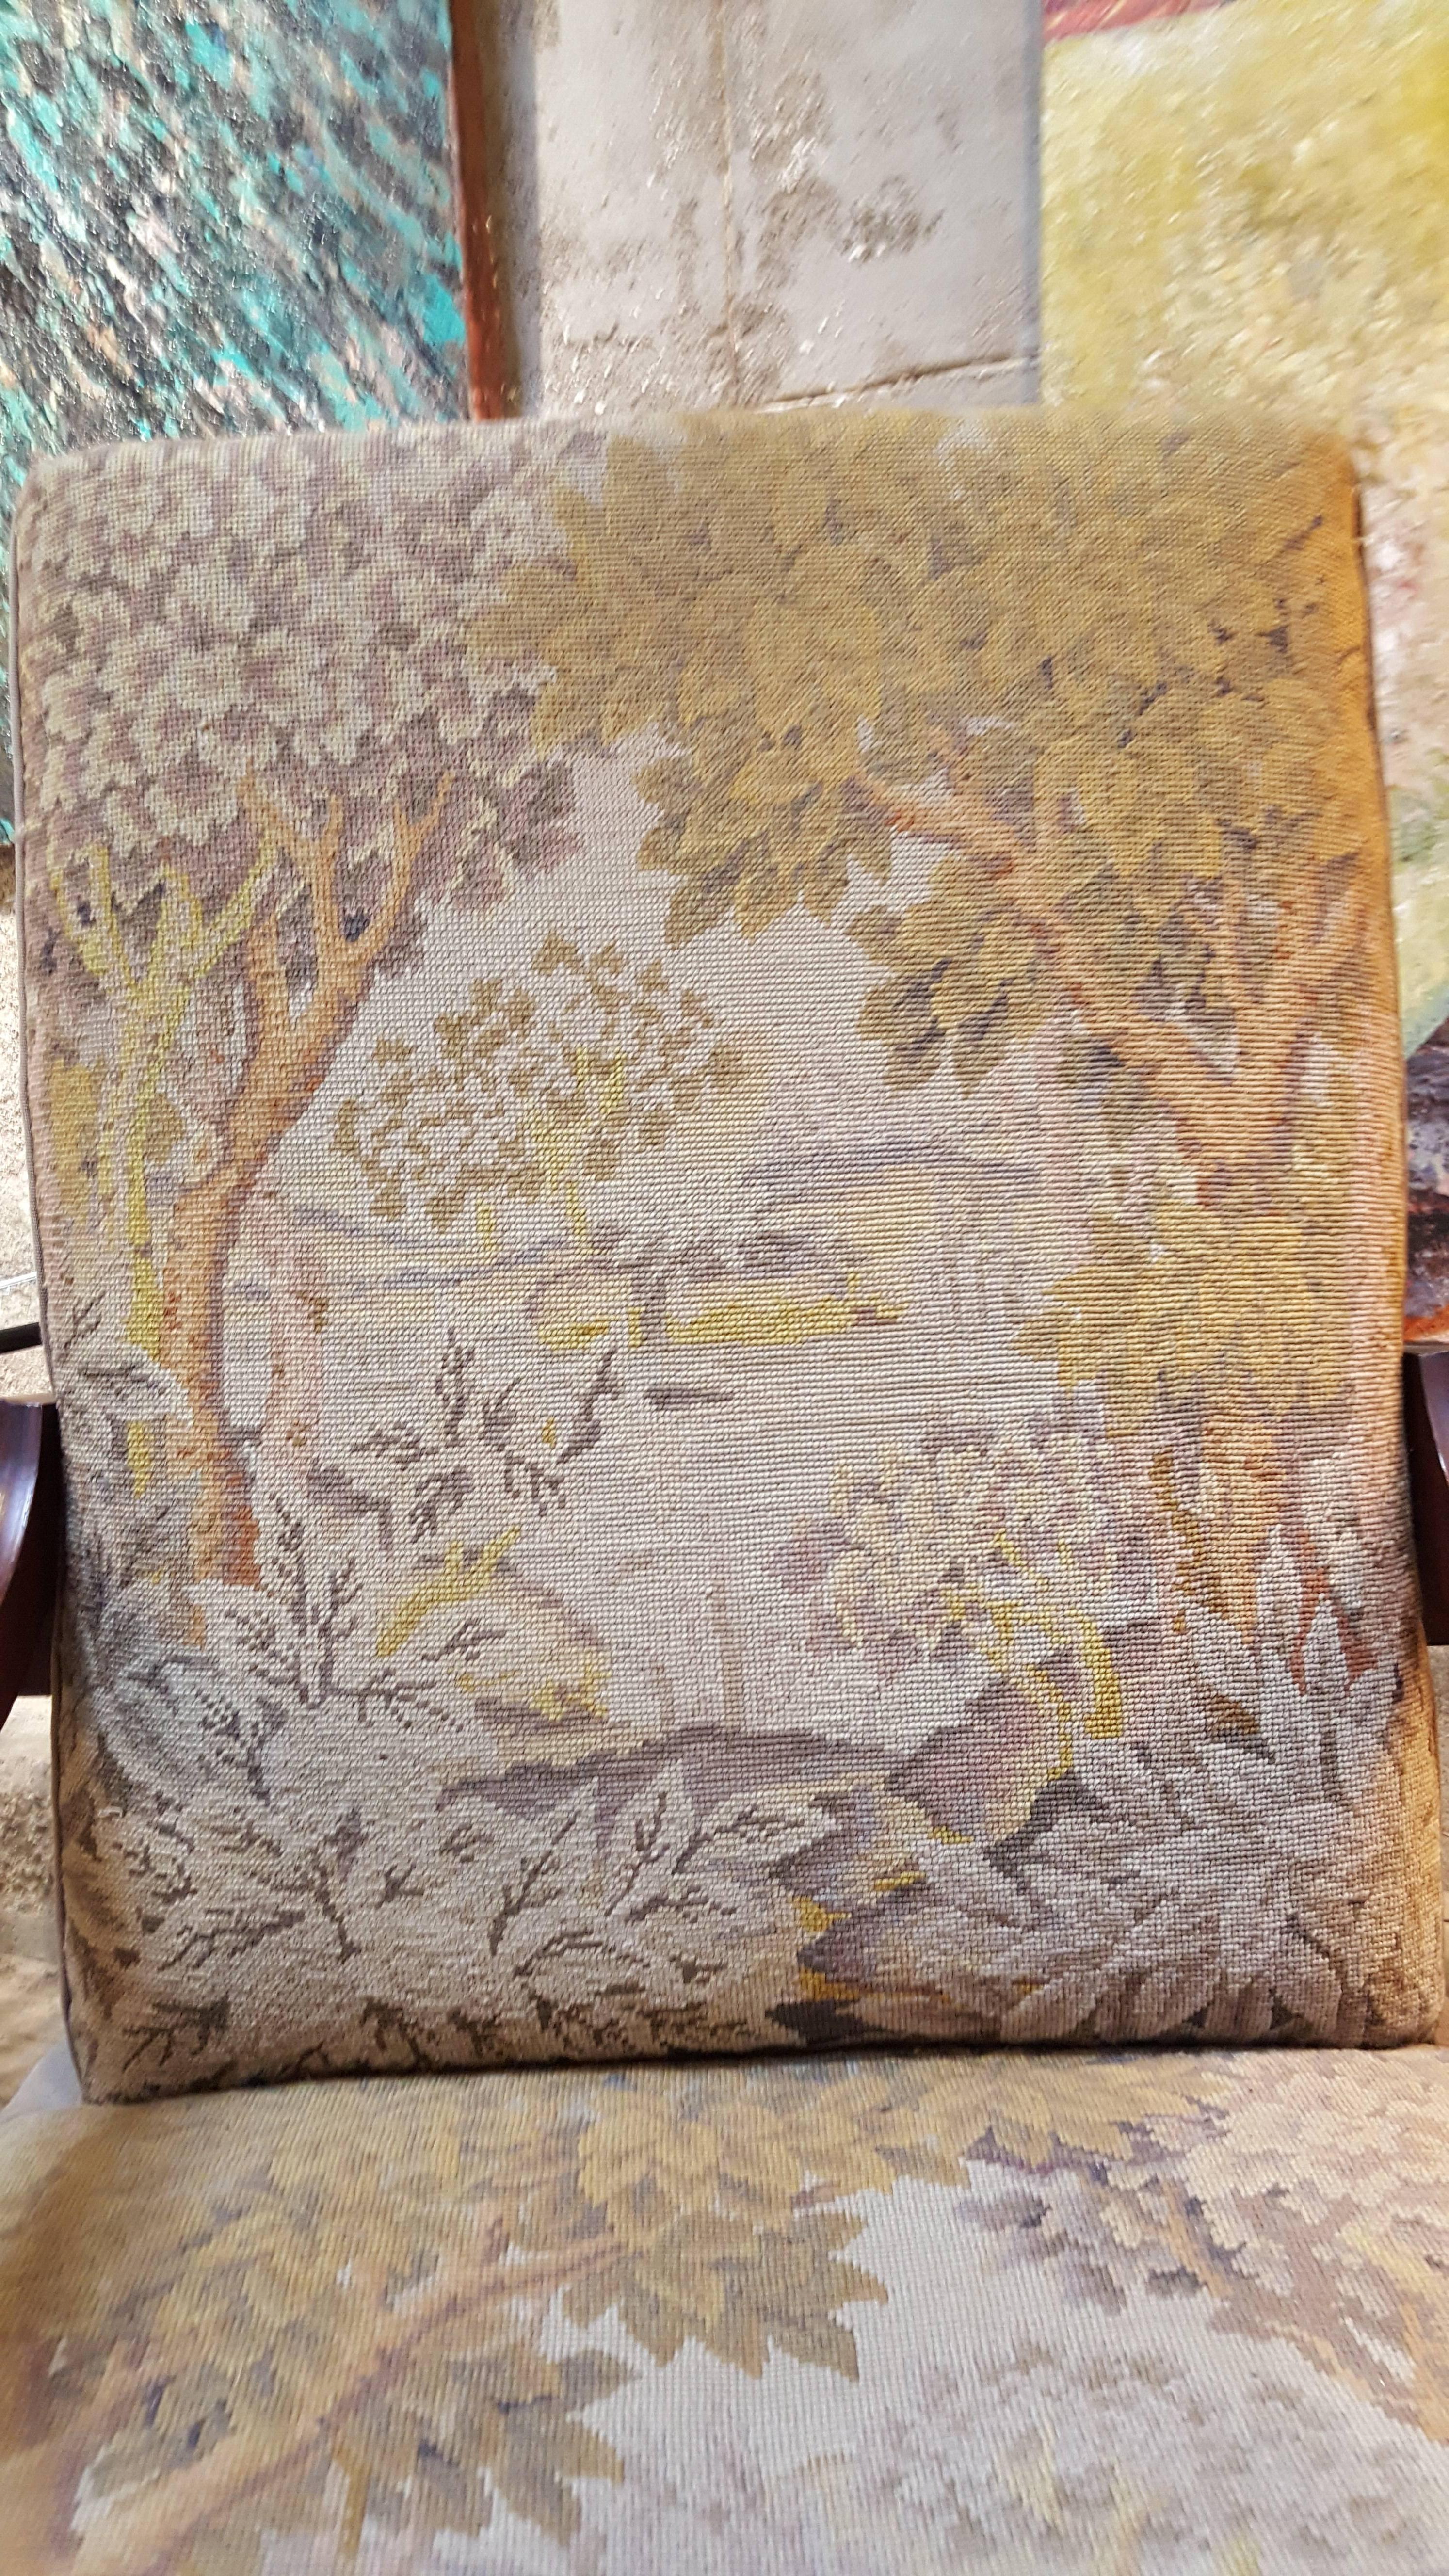 Large-Scale Armchair Chair with Tapestry Upholstery In Good Condition For Sale In Fulton, CA